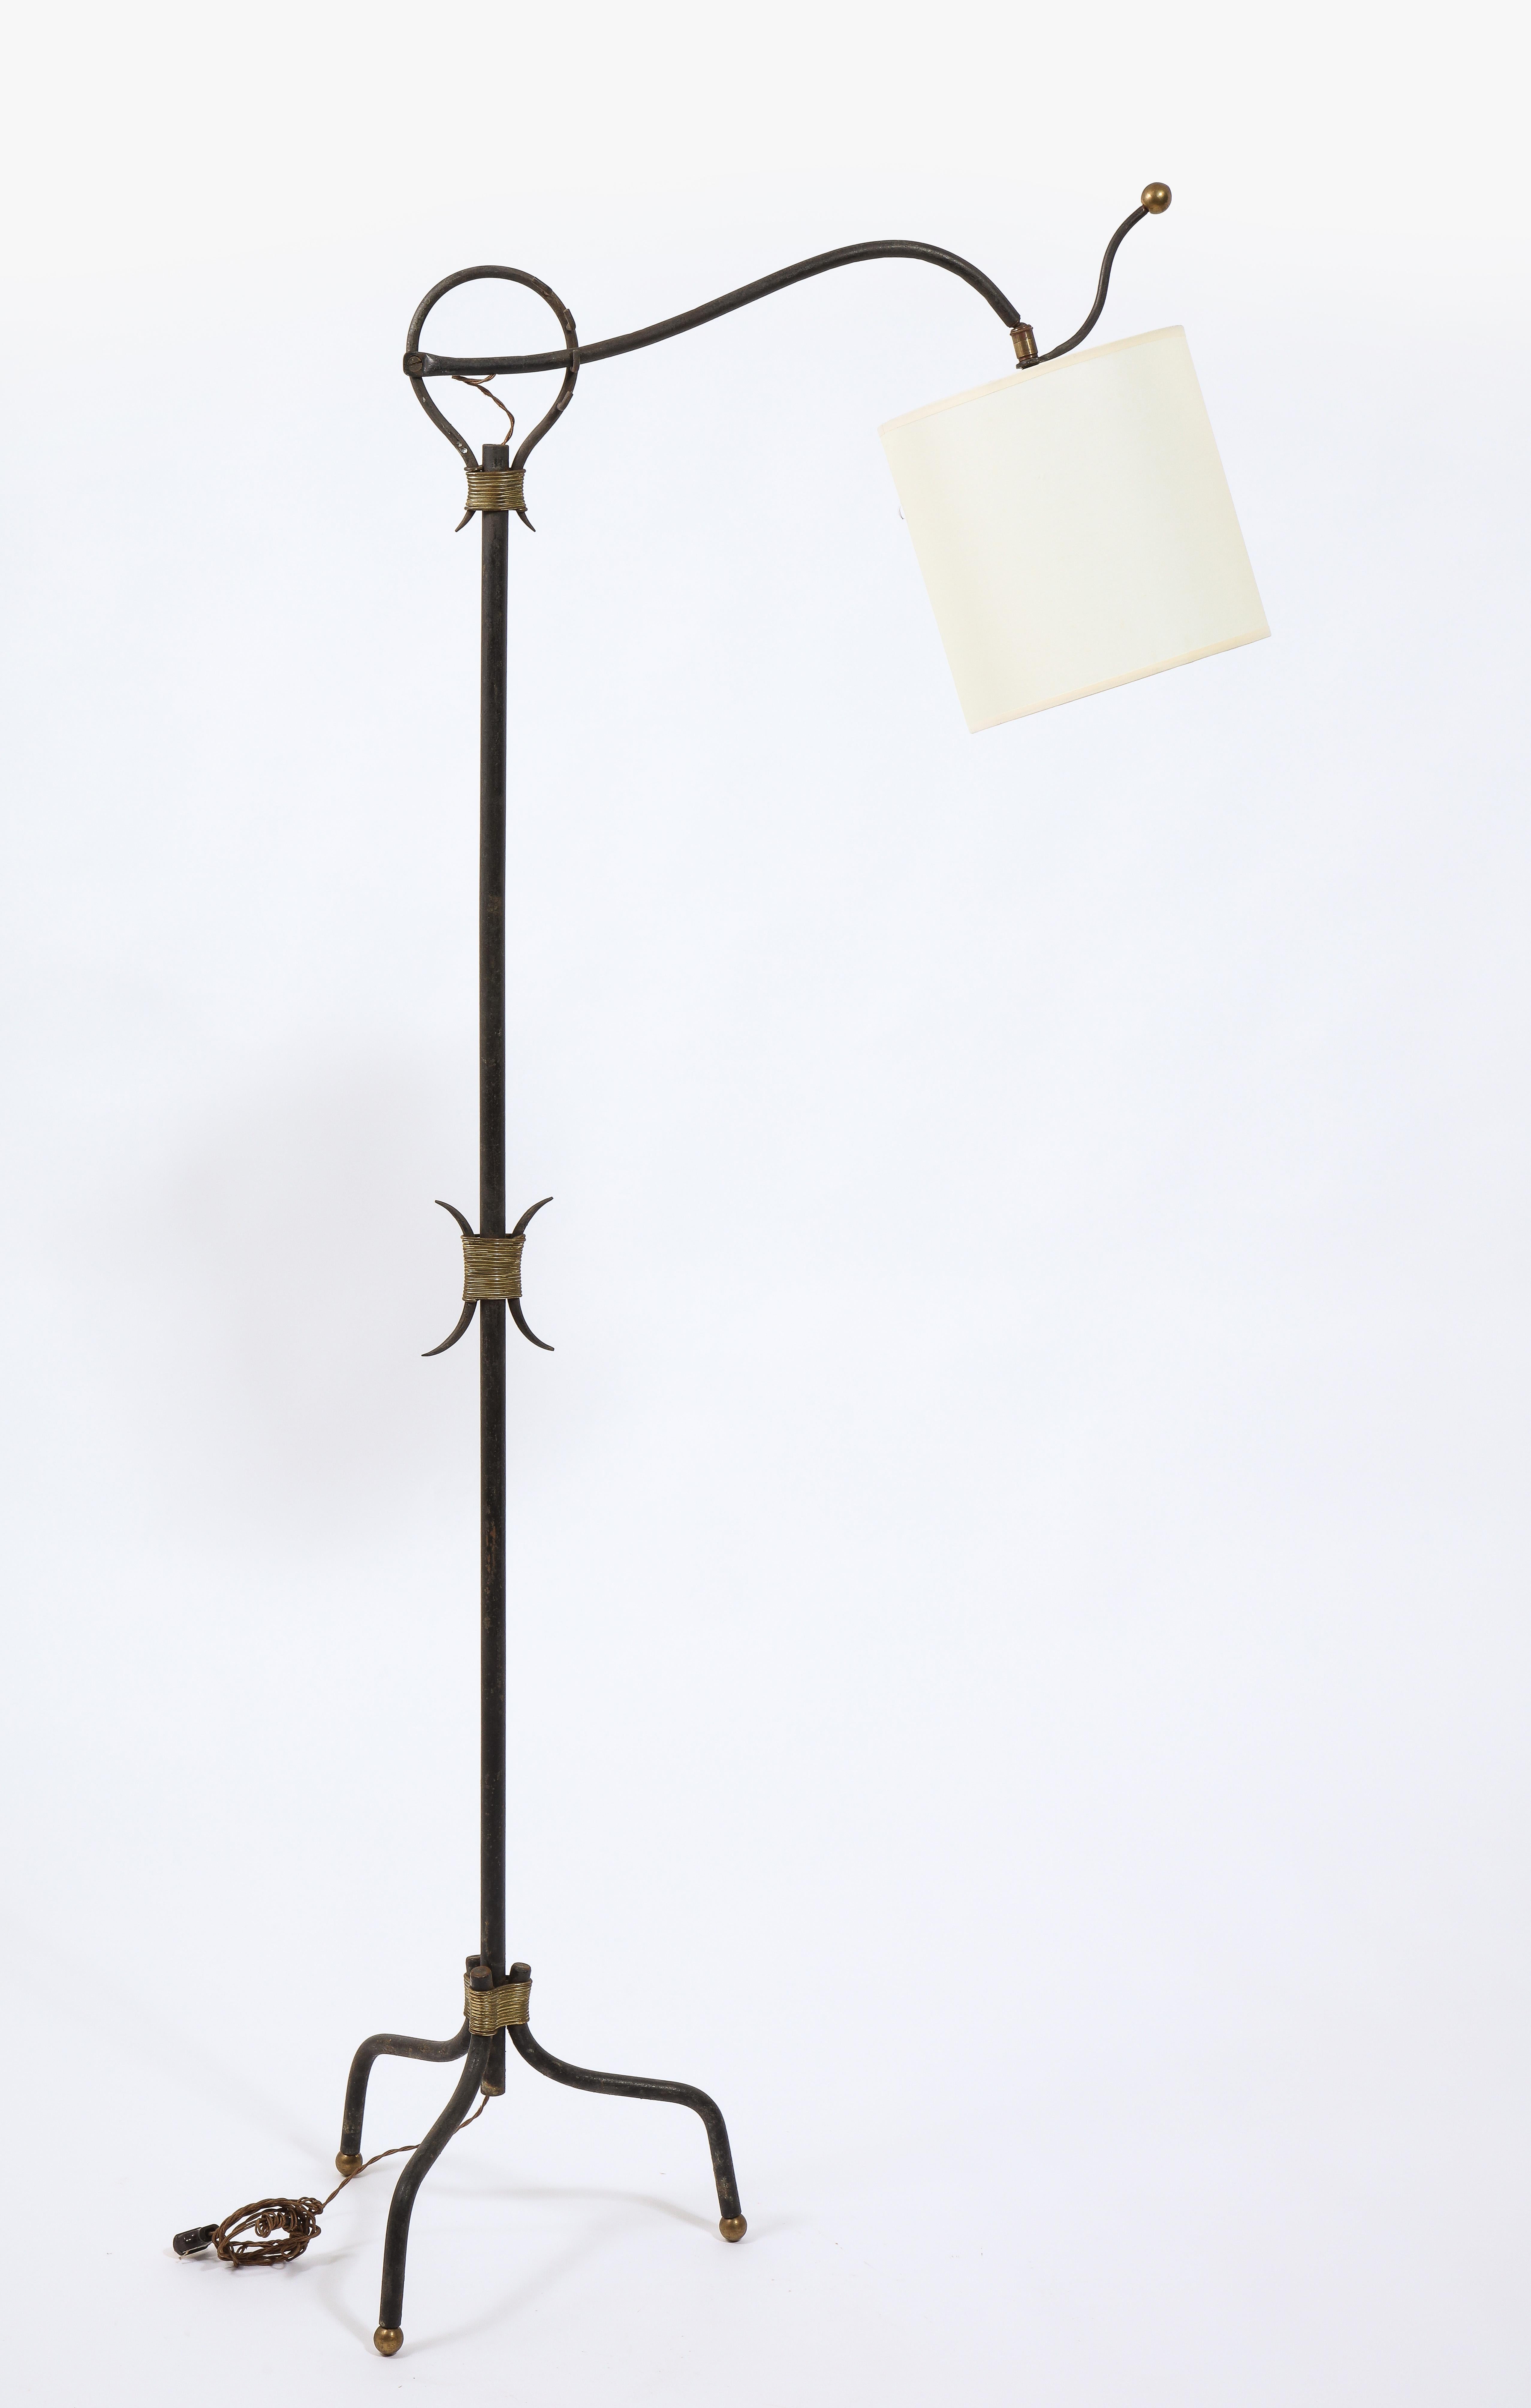 Adjustable tripod wrought iron floor lamp with brass accent and paper shade.